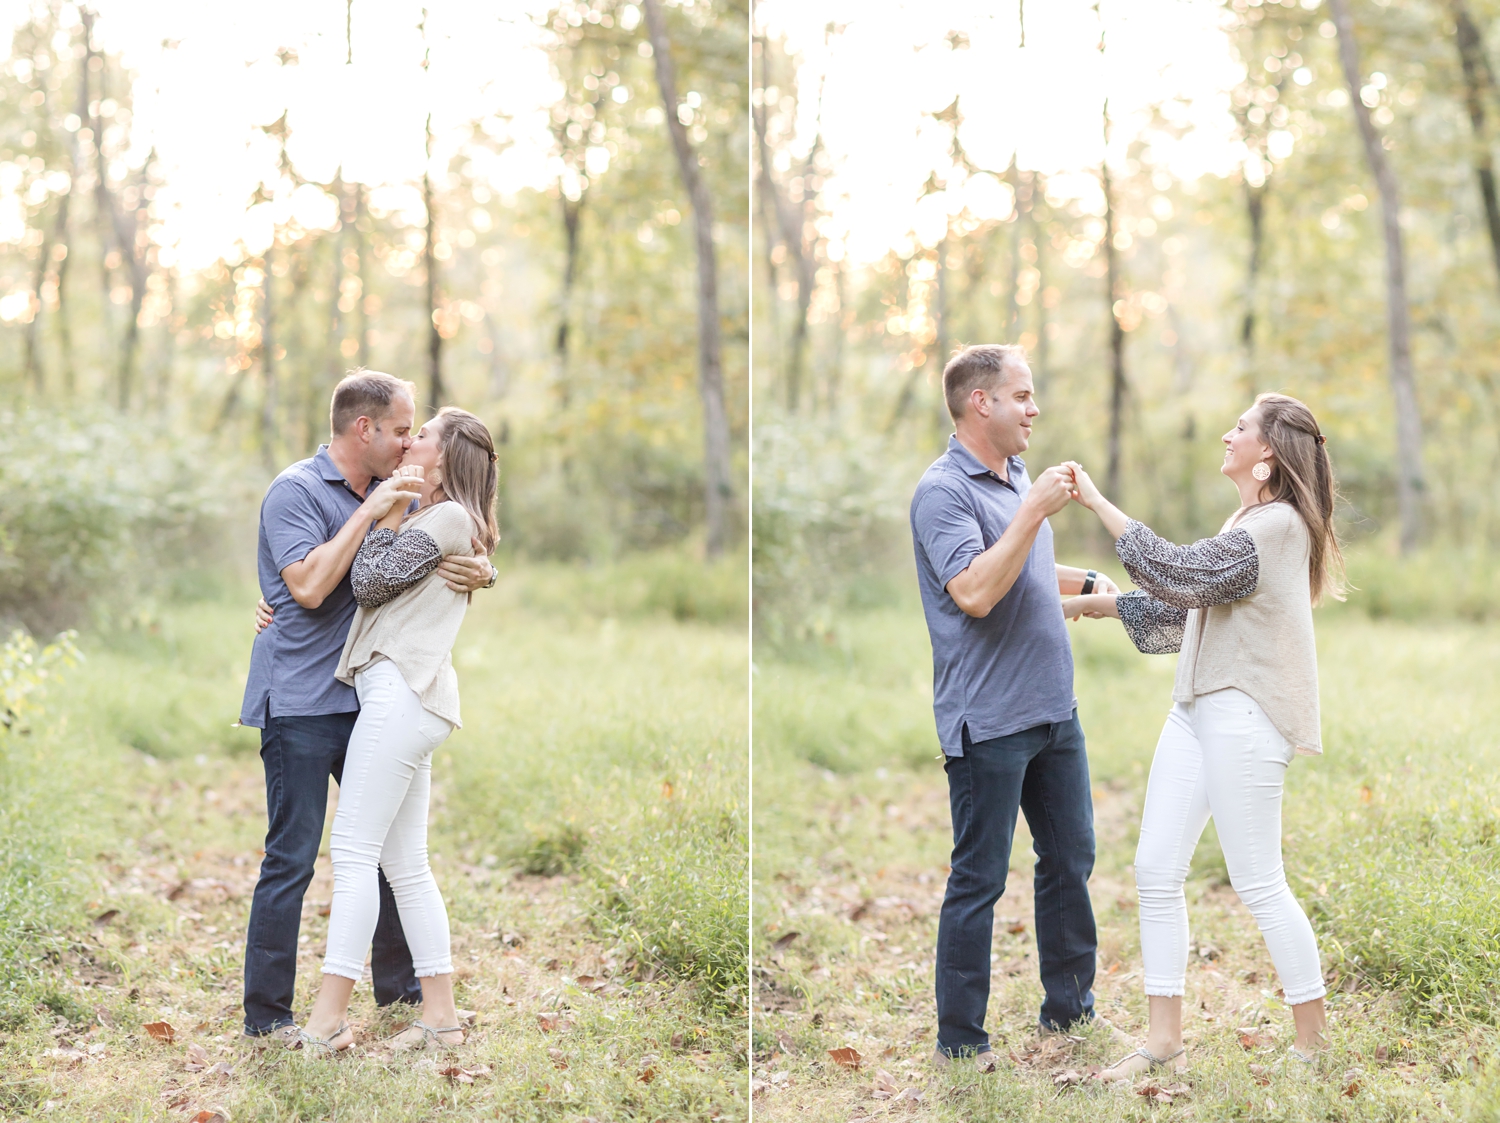  I love having my couples practice their first dance! It makes for lots of laughs and sweet kisses. 